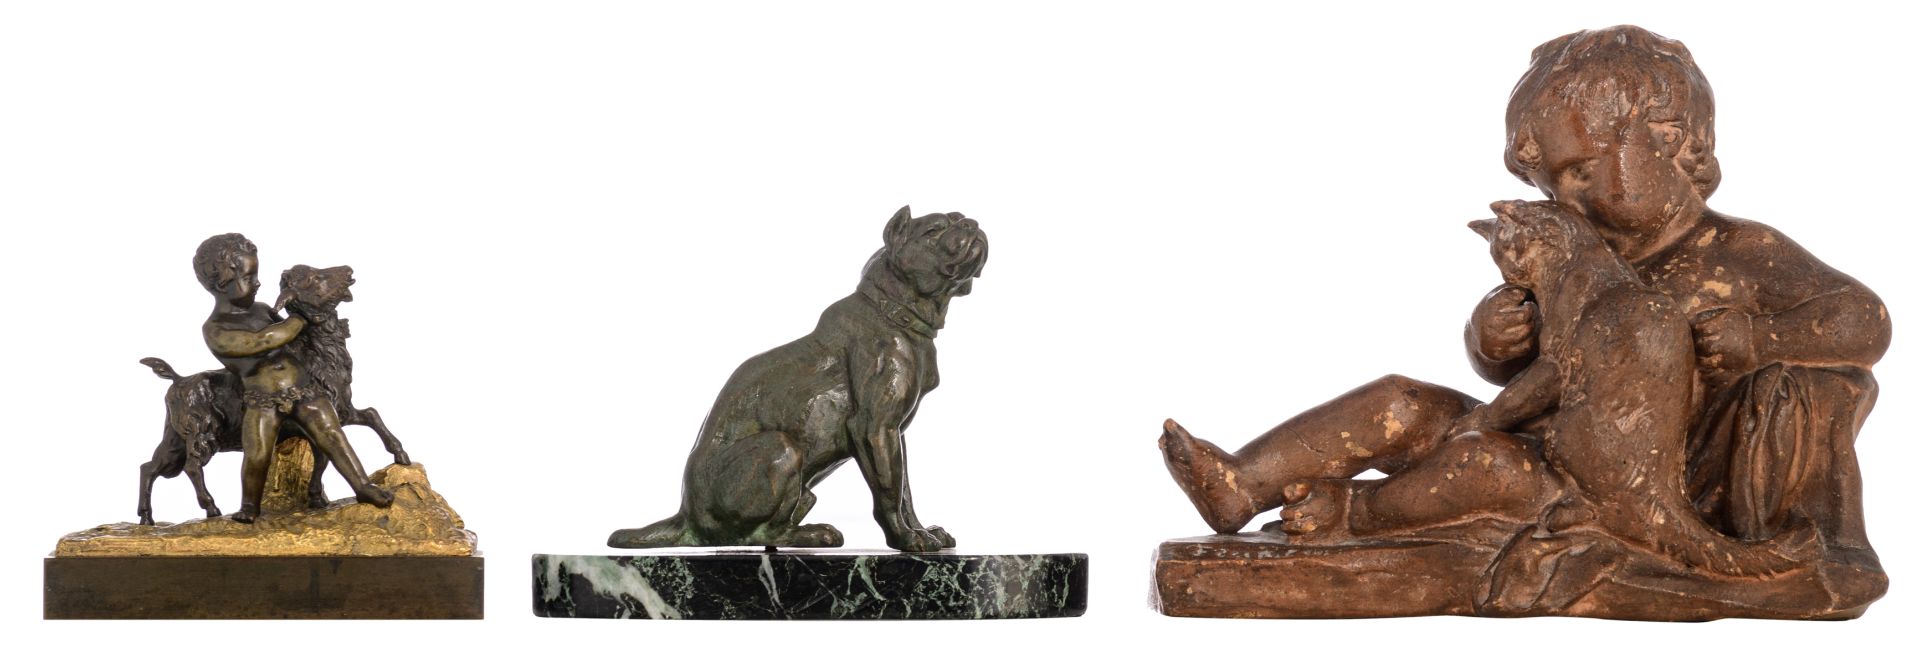 No visible signature, a putto playing with a goat, patinated and polished bronze, 19thC, H 17 cm (in